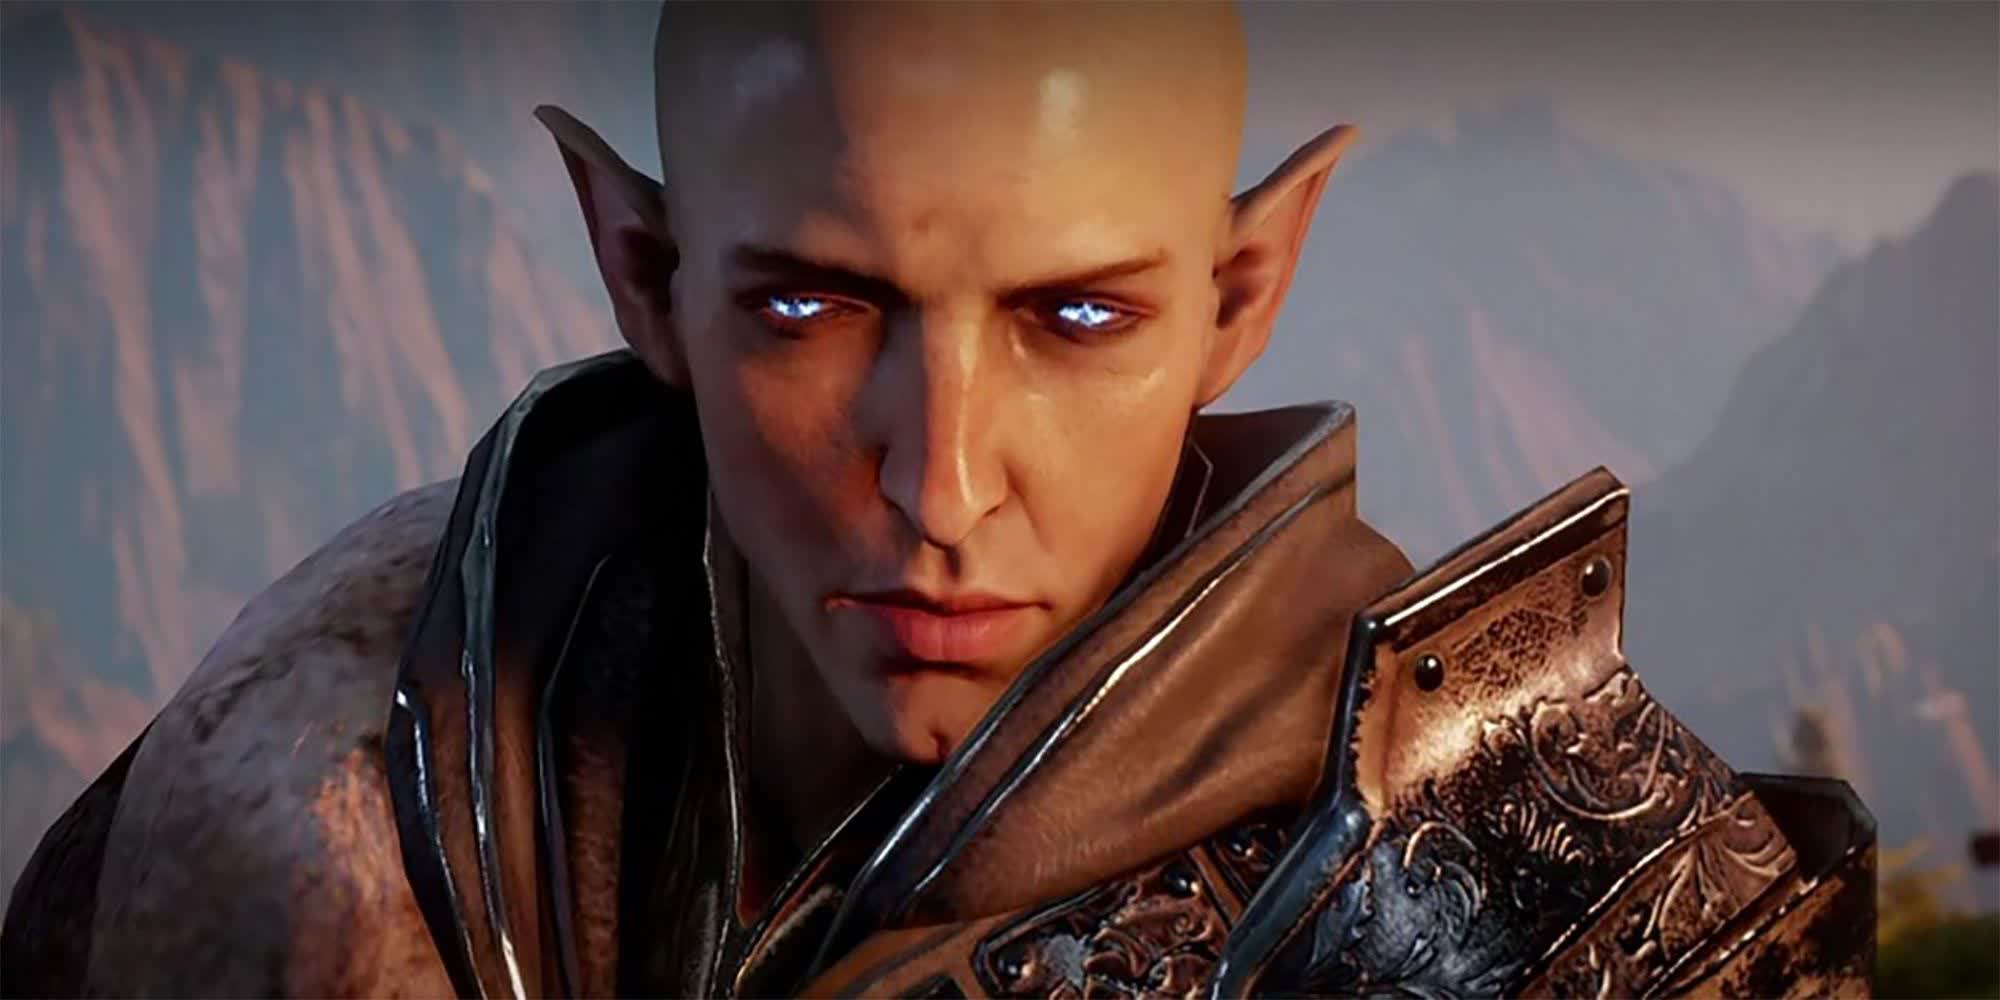 Dragon Age 4 gets an official title, now known as Dragon Age: Dreadwolf